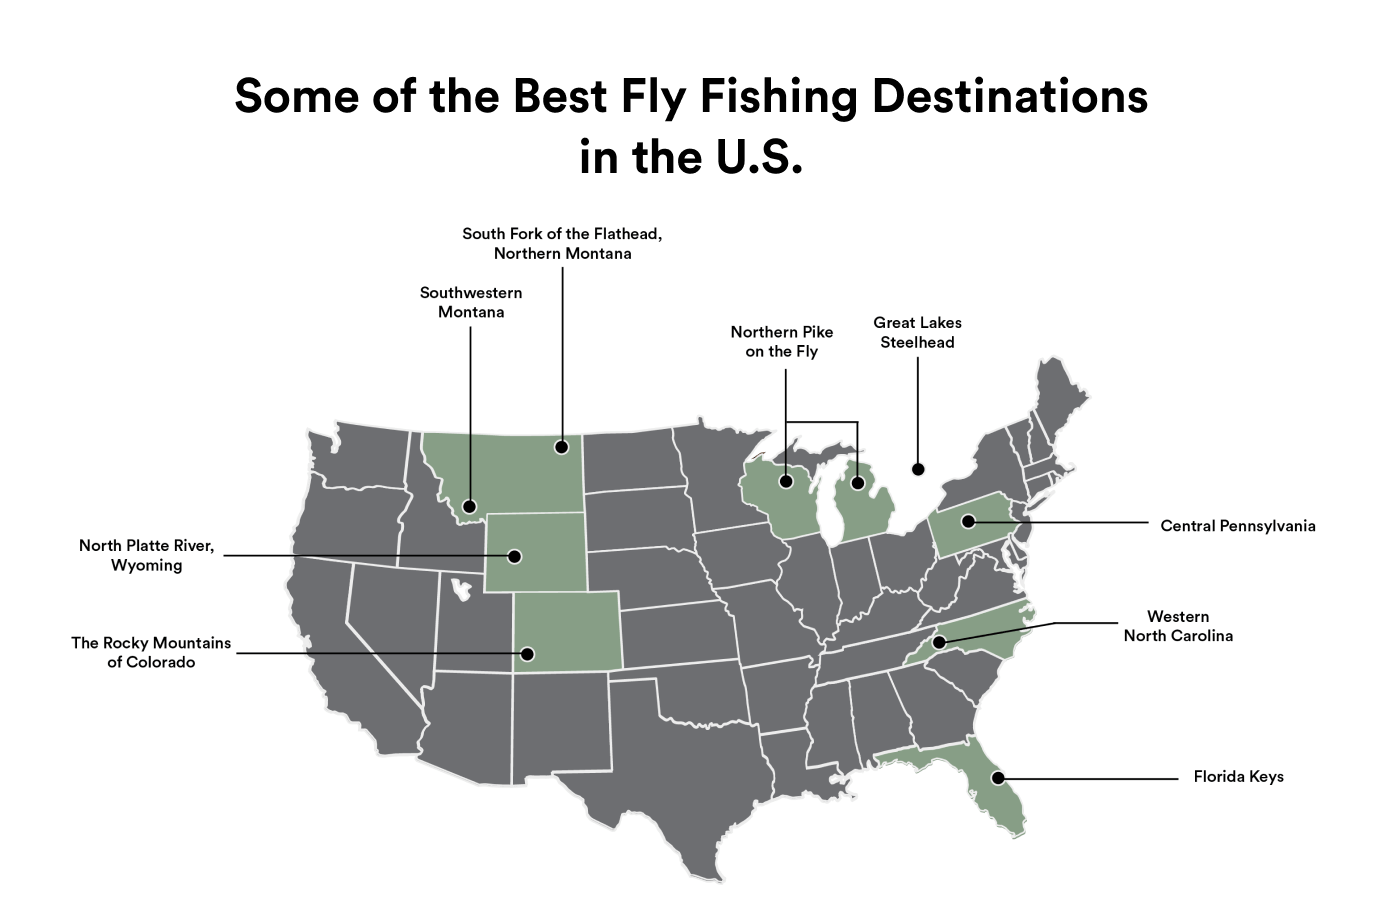 A map of the U.S. highlighting some of its best fly fishing destinations. Lines are used to indicate destinations in Montana, Pennsylvania, Colorado, Wyoming, North Carolina, and Florida.